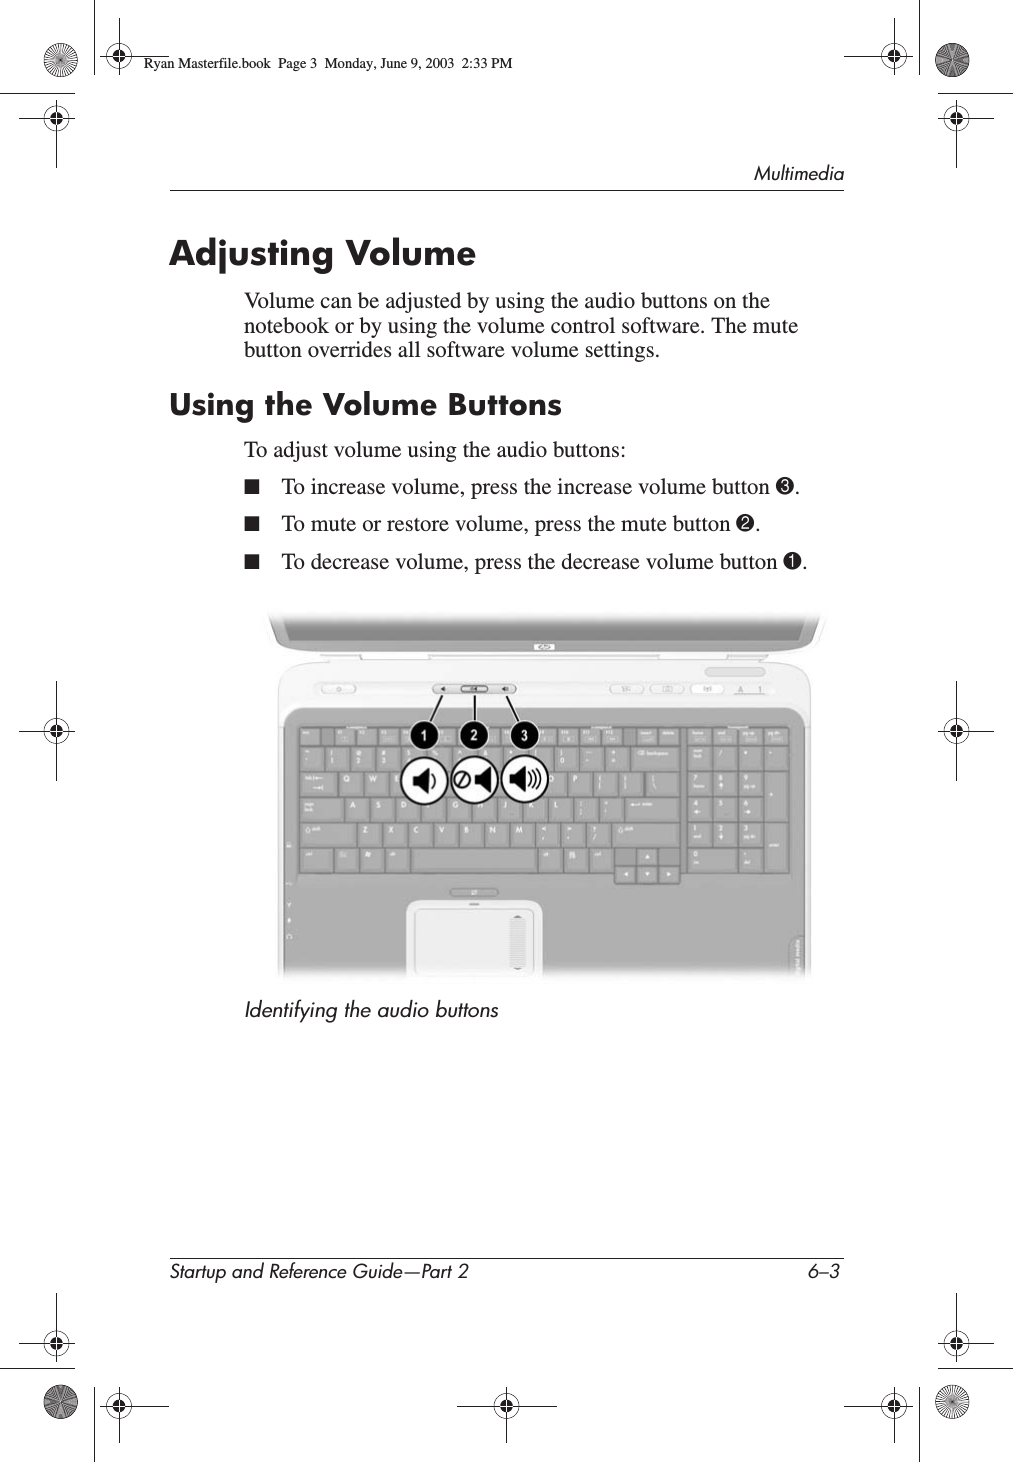 MultimediaStartup and Reference Guide—Part 2 6–3Adjusting VolumeVolume can be adjusted by using the audio buttons on the notebook or by using the volume control software. The mute button overrides all software volume settings.Using the Volume ButtonsTo adjust volume using the audio buttons:■To increase volume, press the increase volume button 3.■To mute or restore volume, press the mute button 2.■To decrease volume, press the decrease volume button 1.Identifying the audio buttonsRyan Masterfile.book  Page 3  Monday, June 9, 2003  2:33 PM